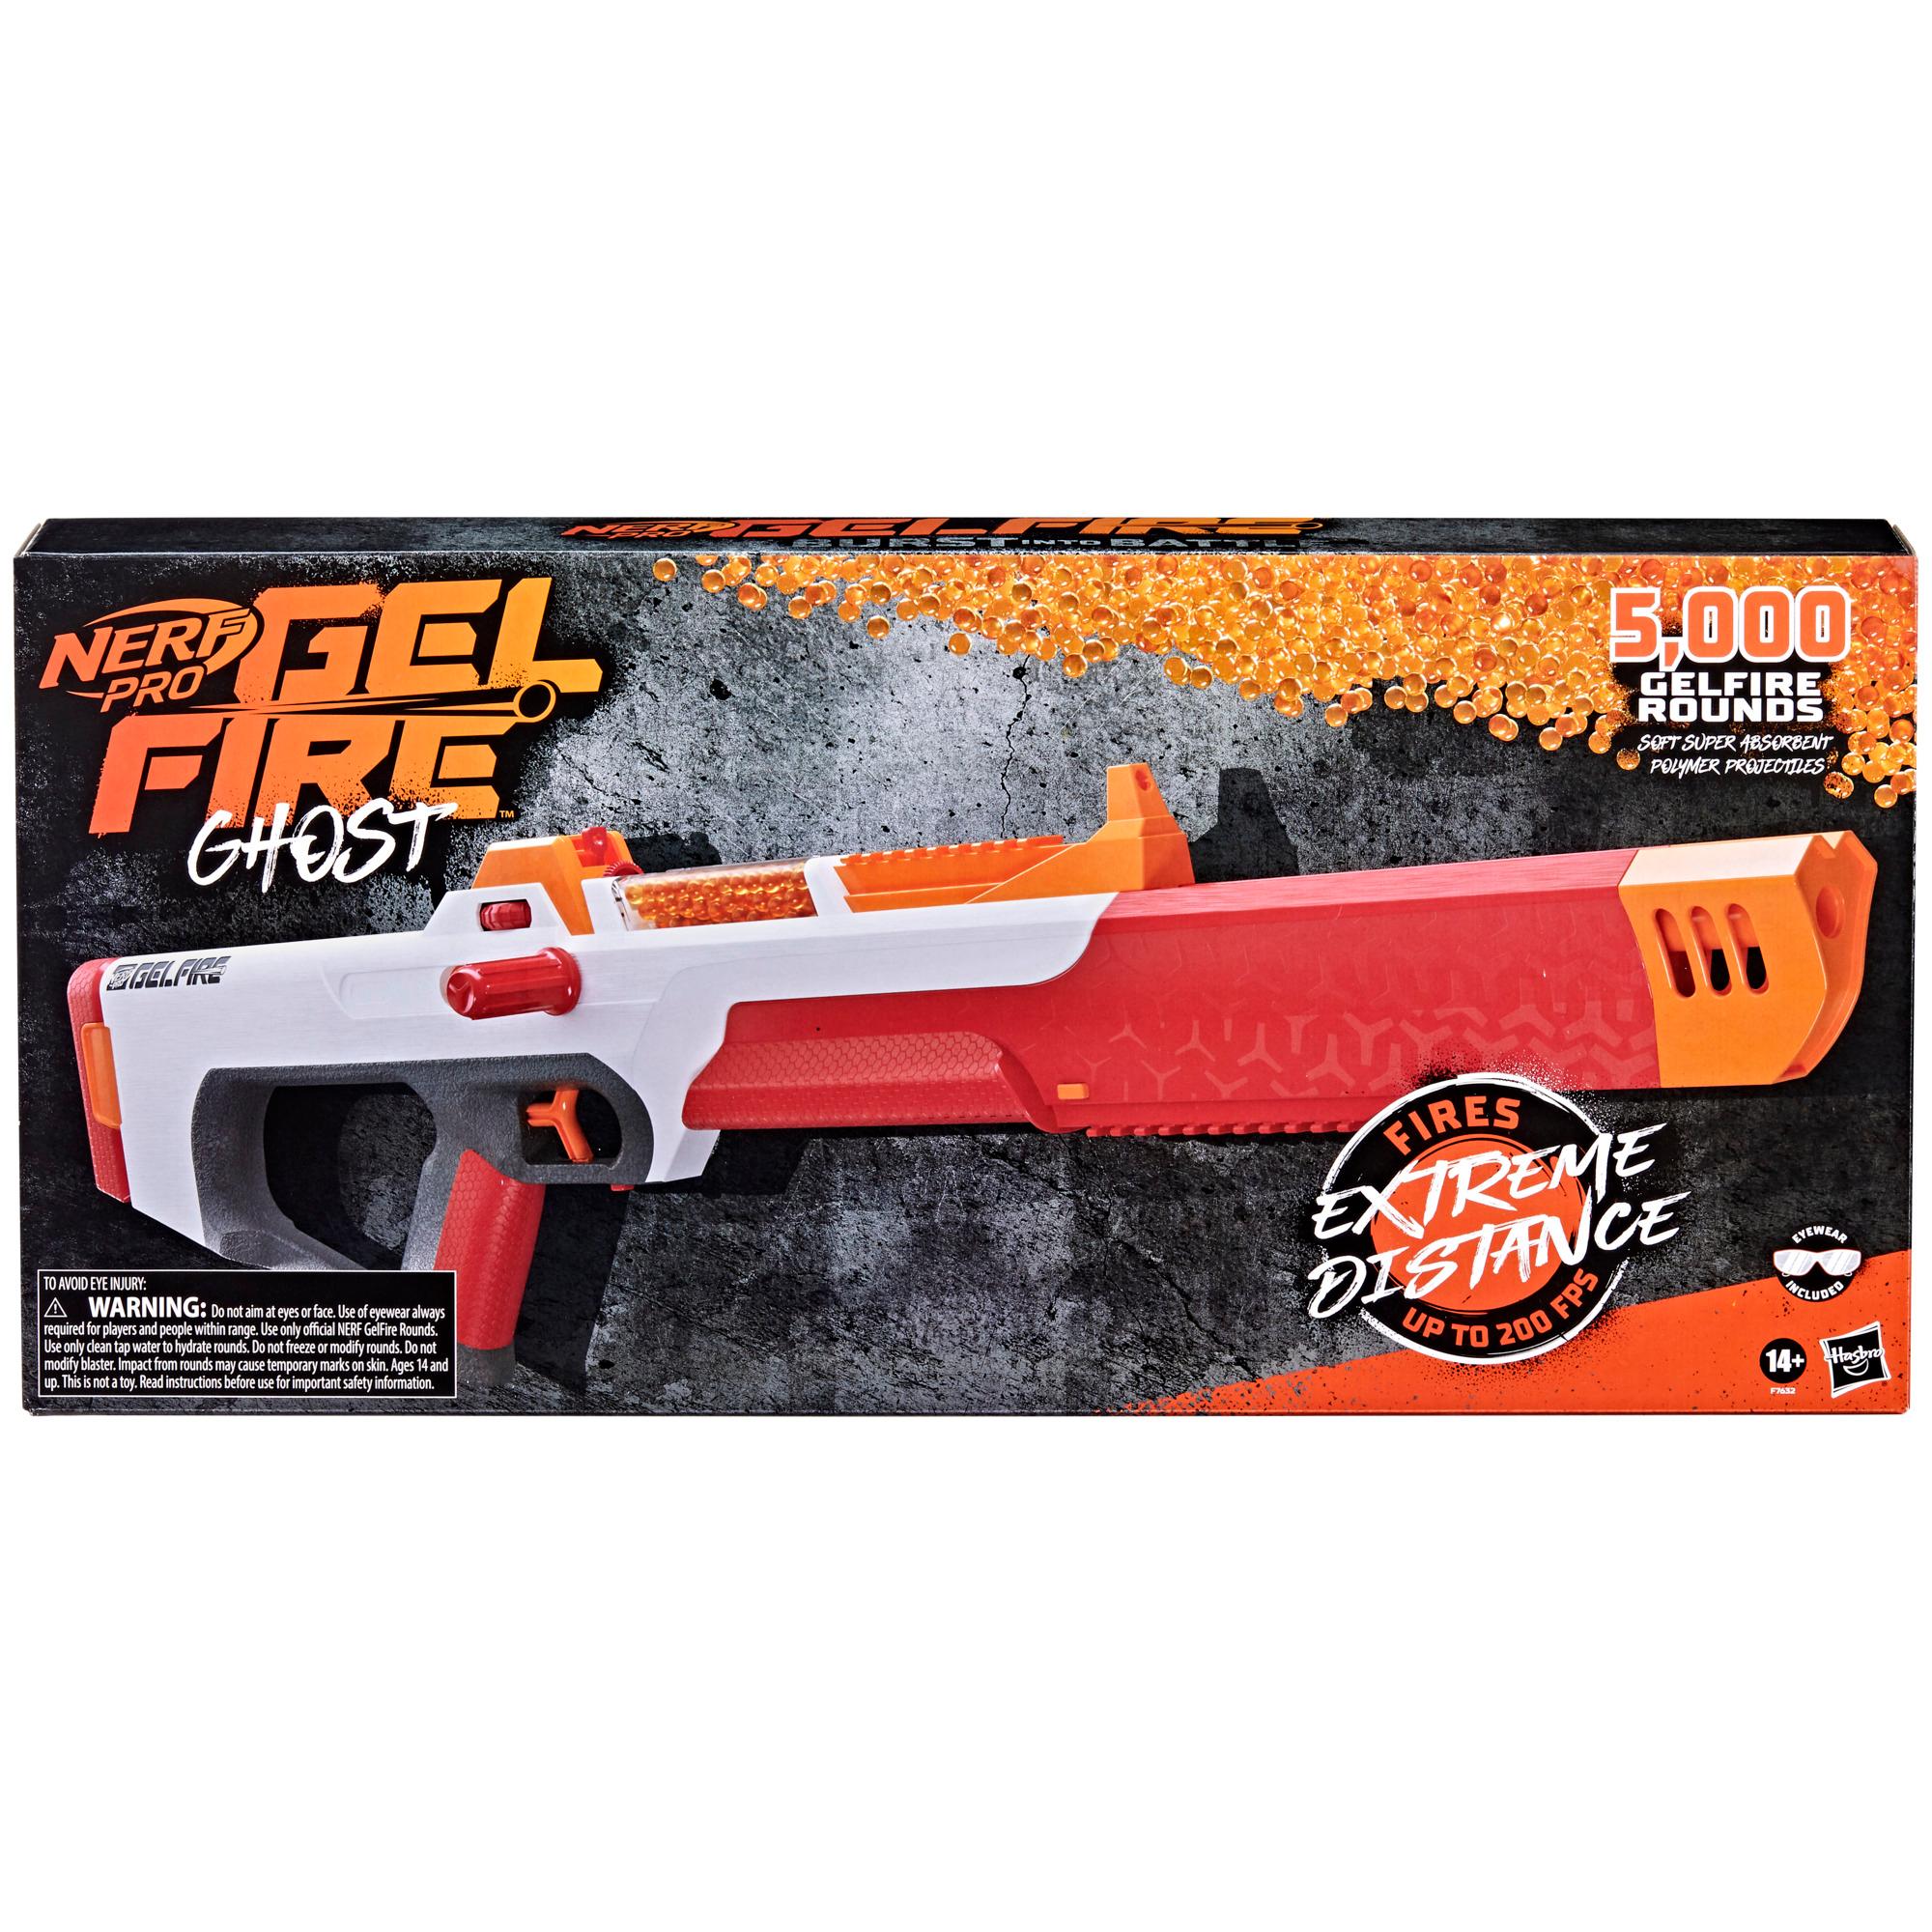 New Nerf Pro Gelfire Blasters Appear! Ghost, Raid, and Dual Wield!